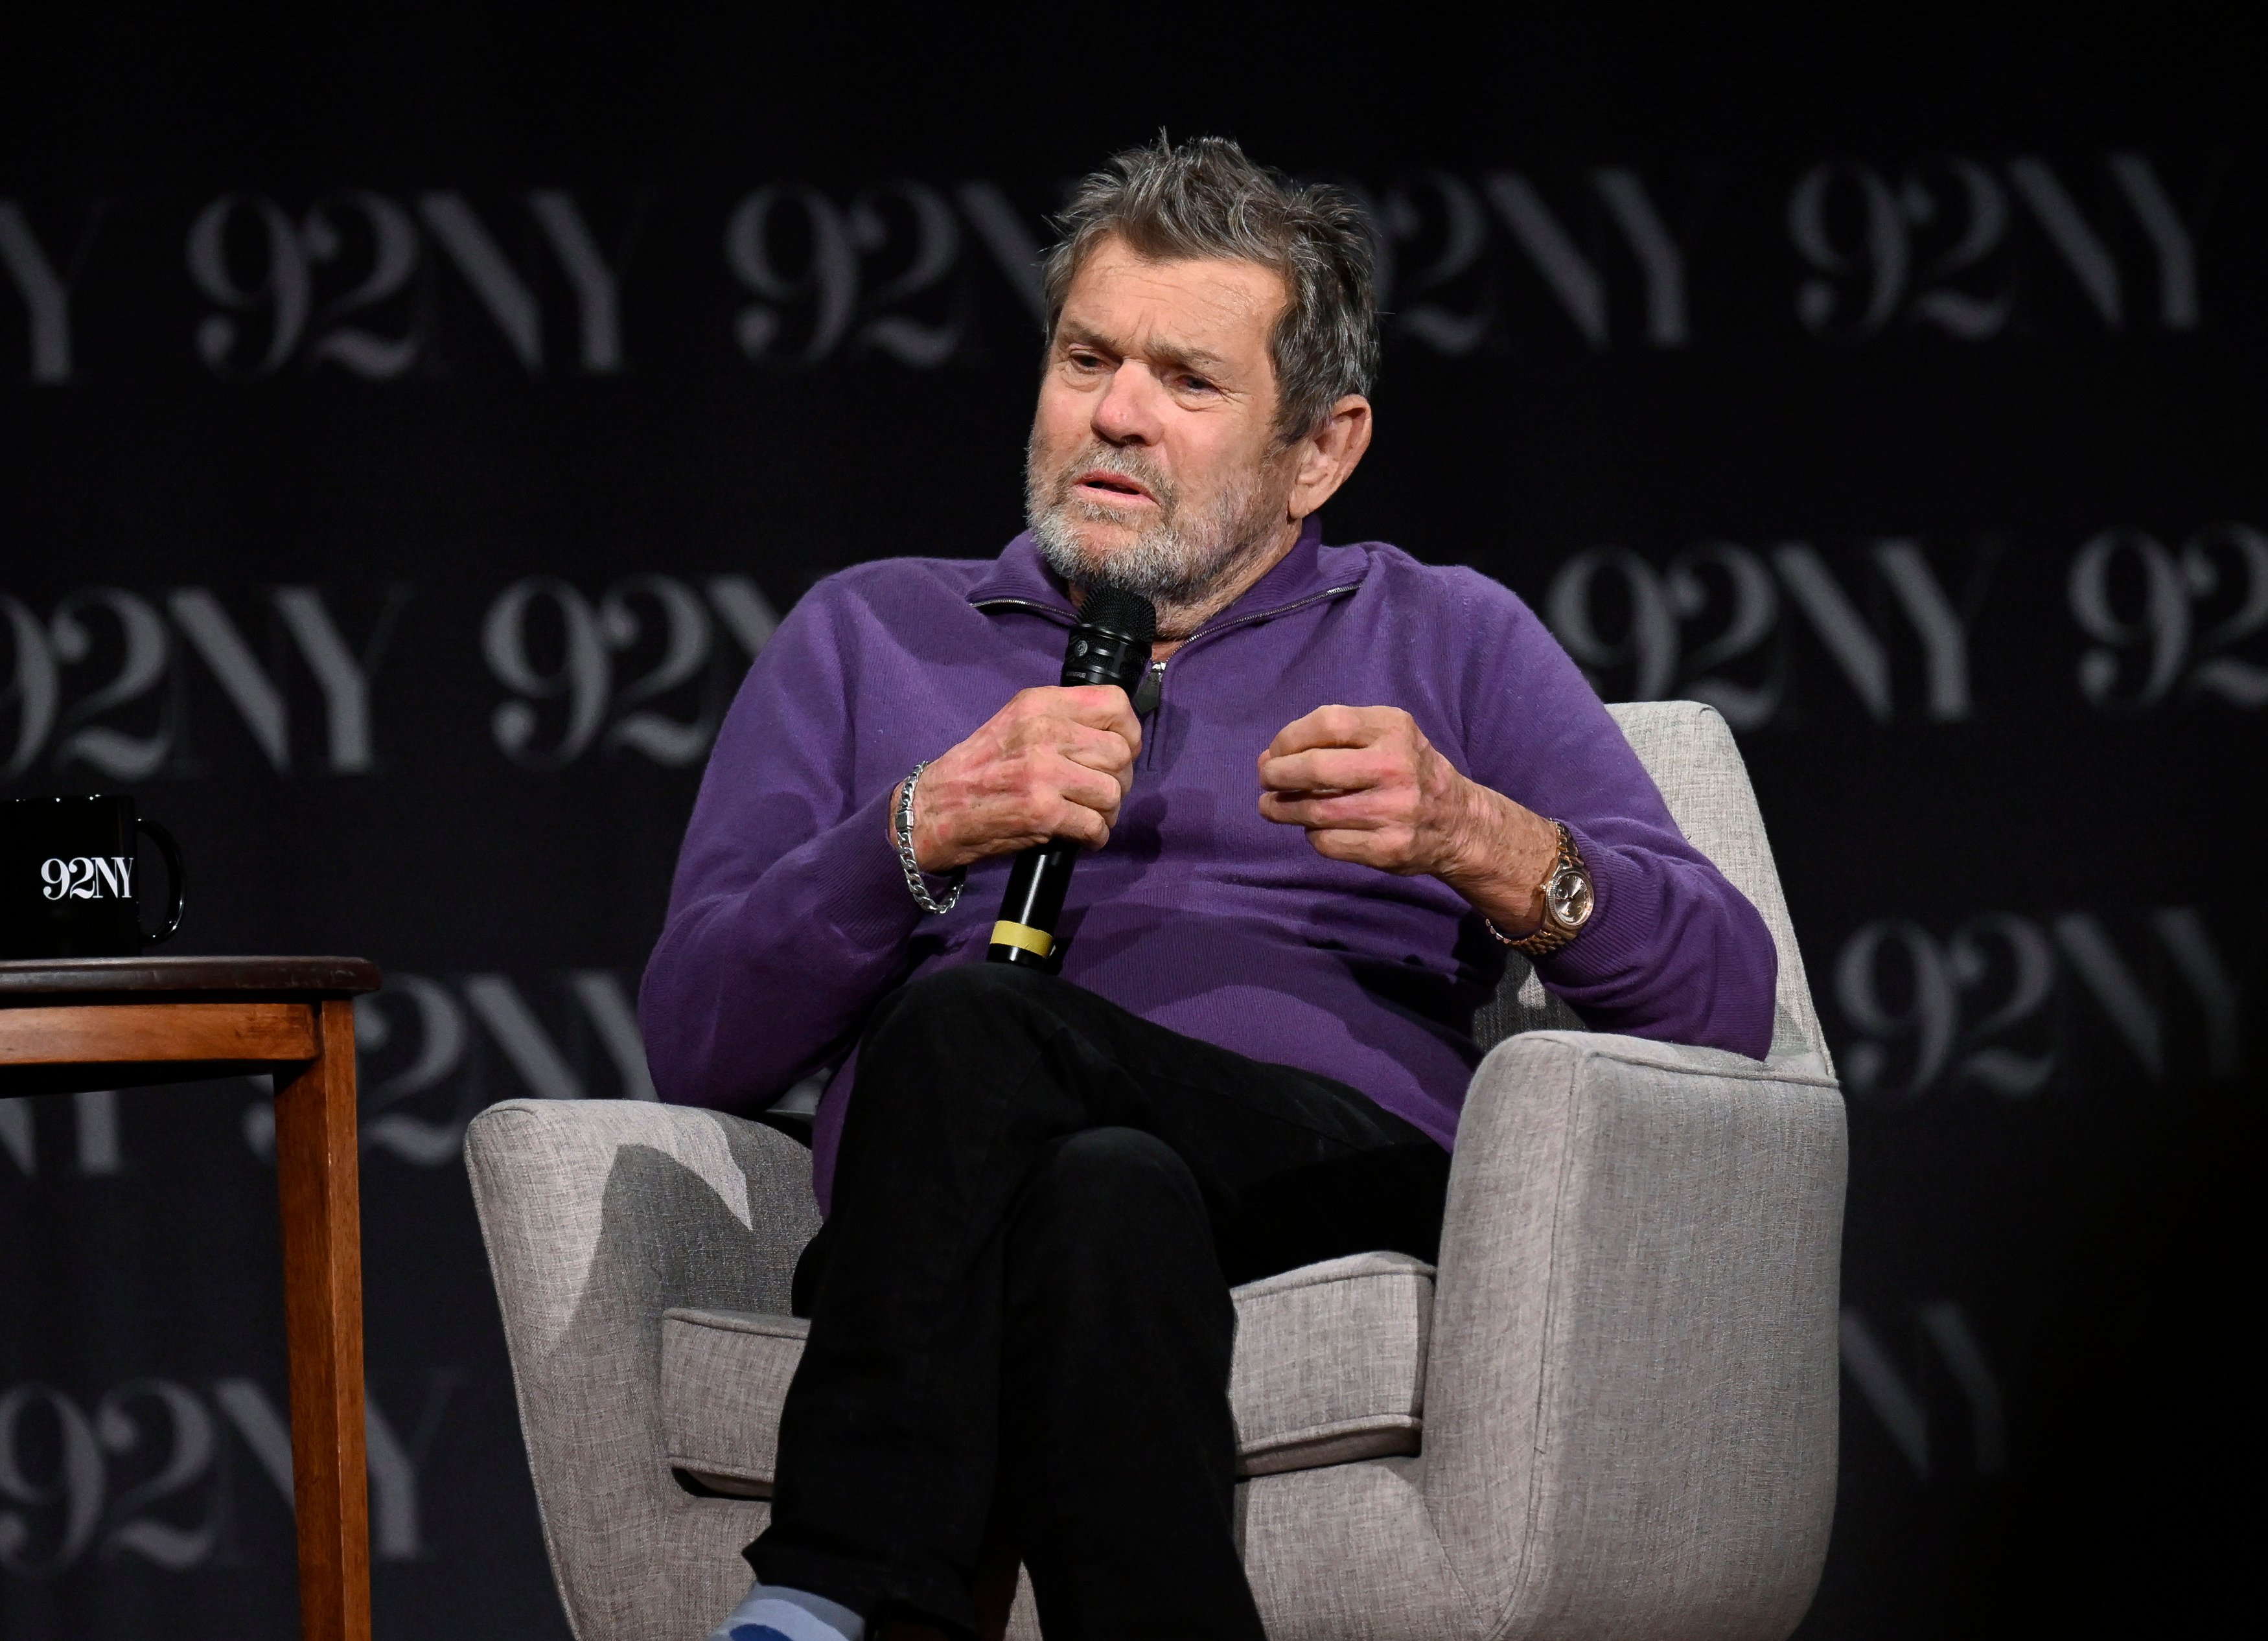 Jann Wenner, co-founder of Rolling Stone magazine, in 2022. Photo: AP